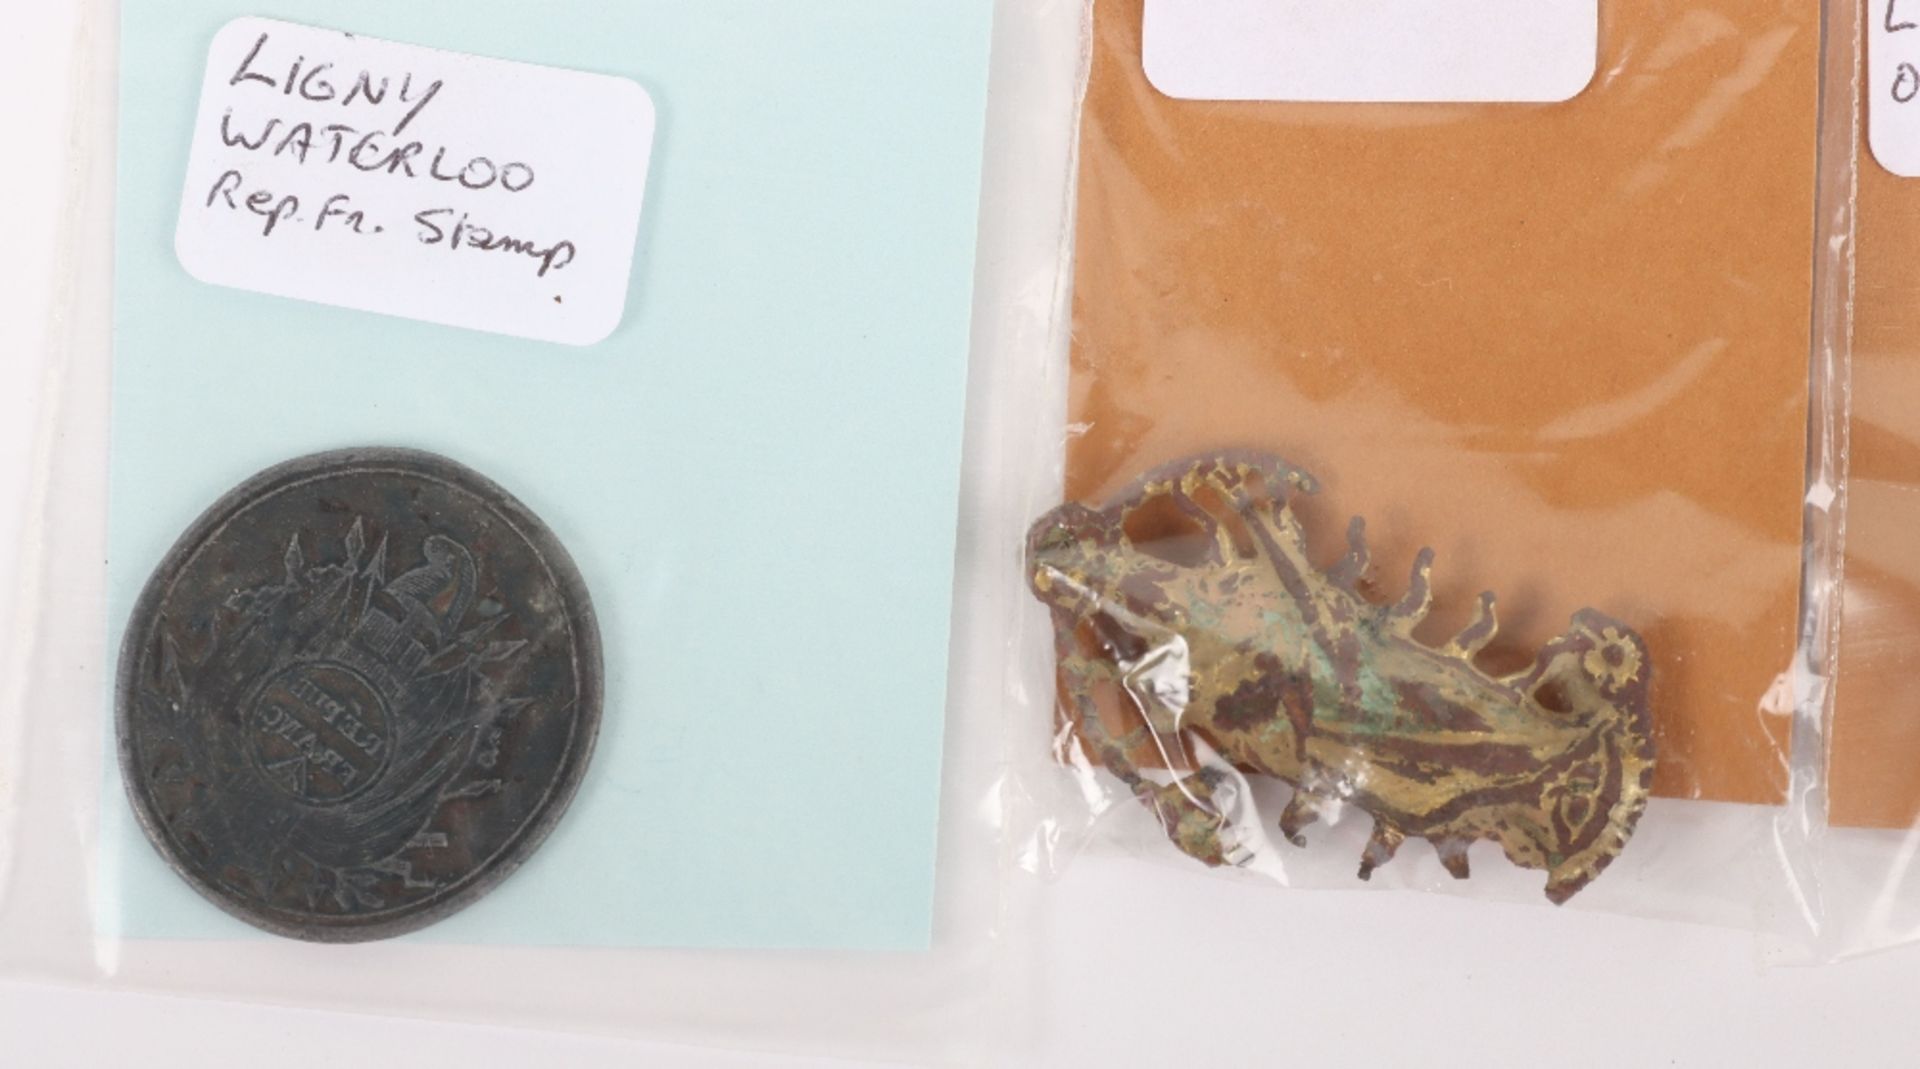 An Assortment of Relics Found at Ligny on the Waterloo Battlefield - Image 3 of 4